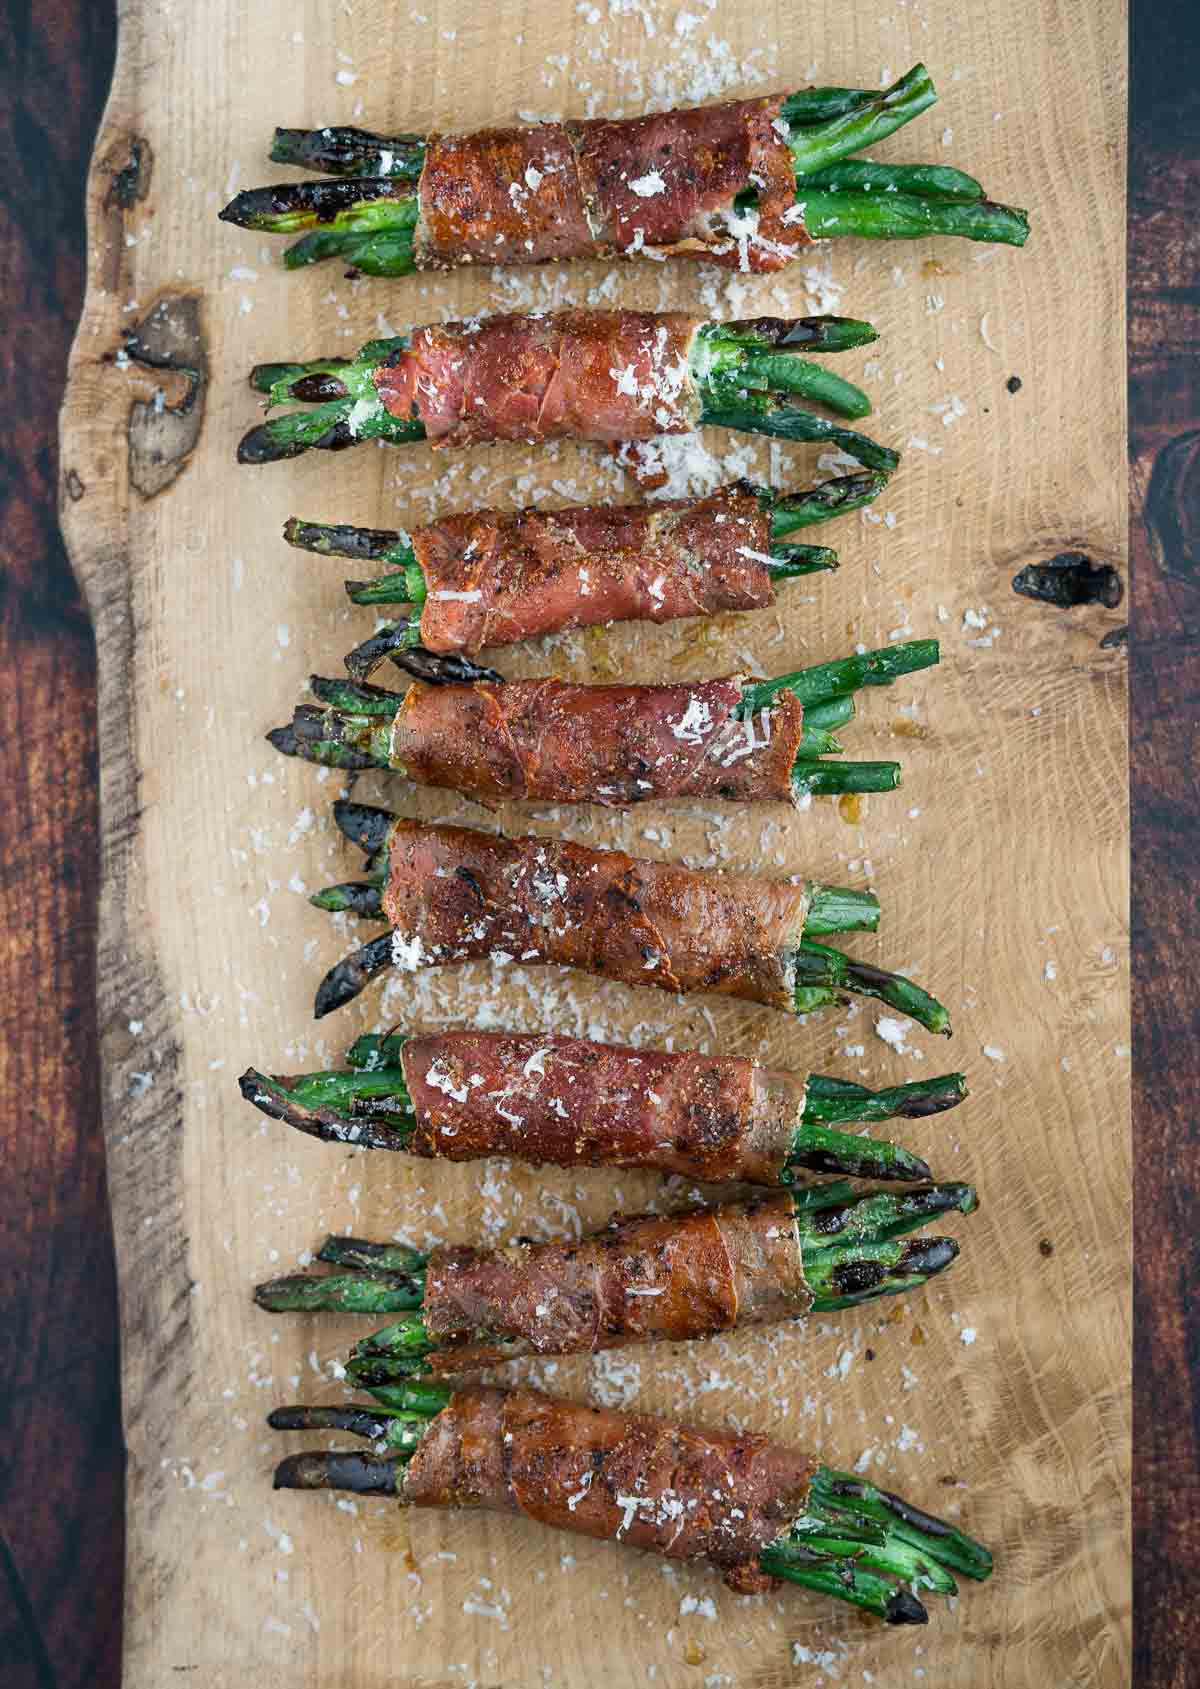 Grilled Green Bundles wrapped in Prosciutto